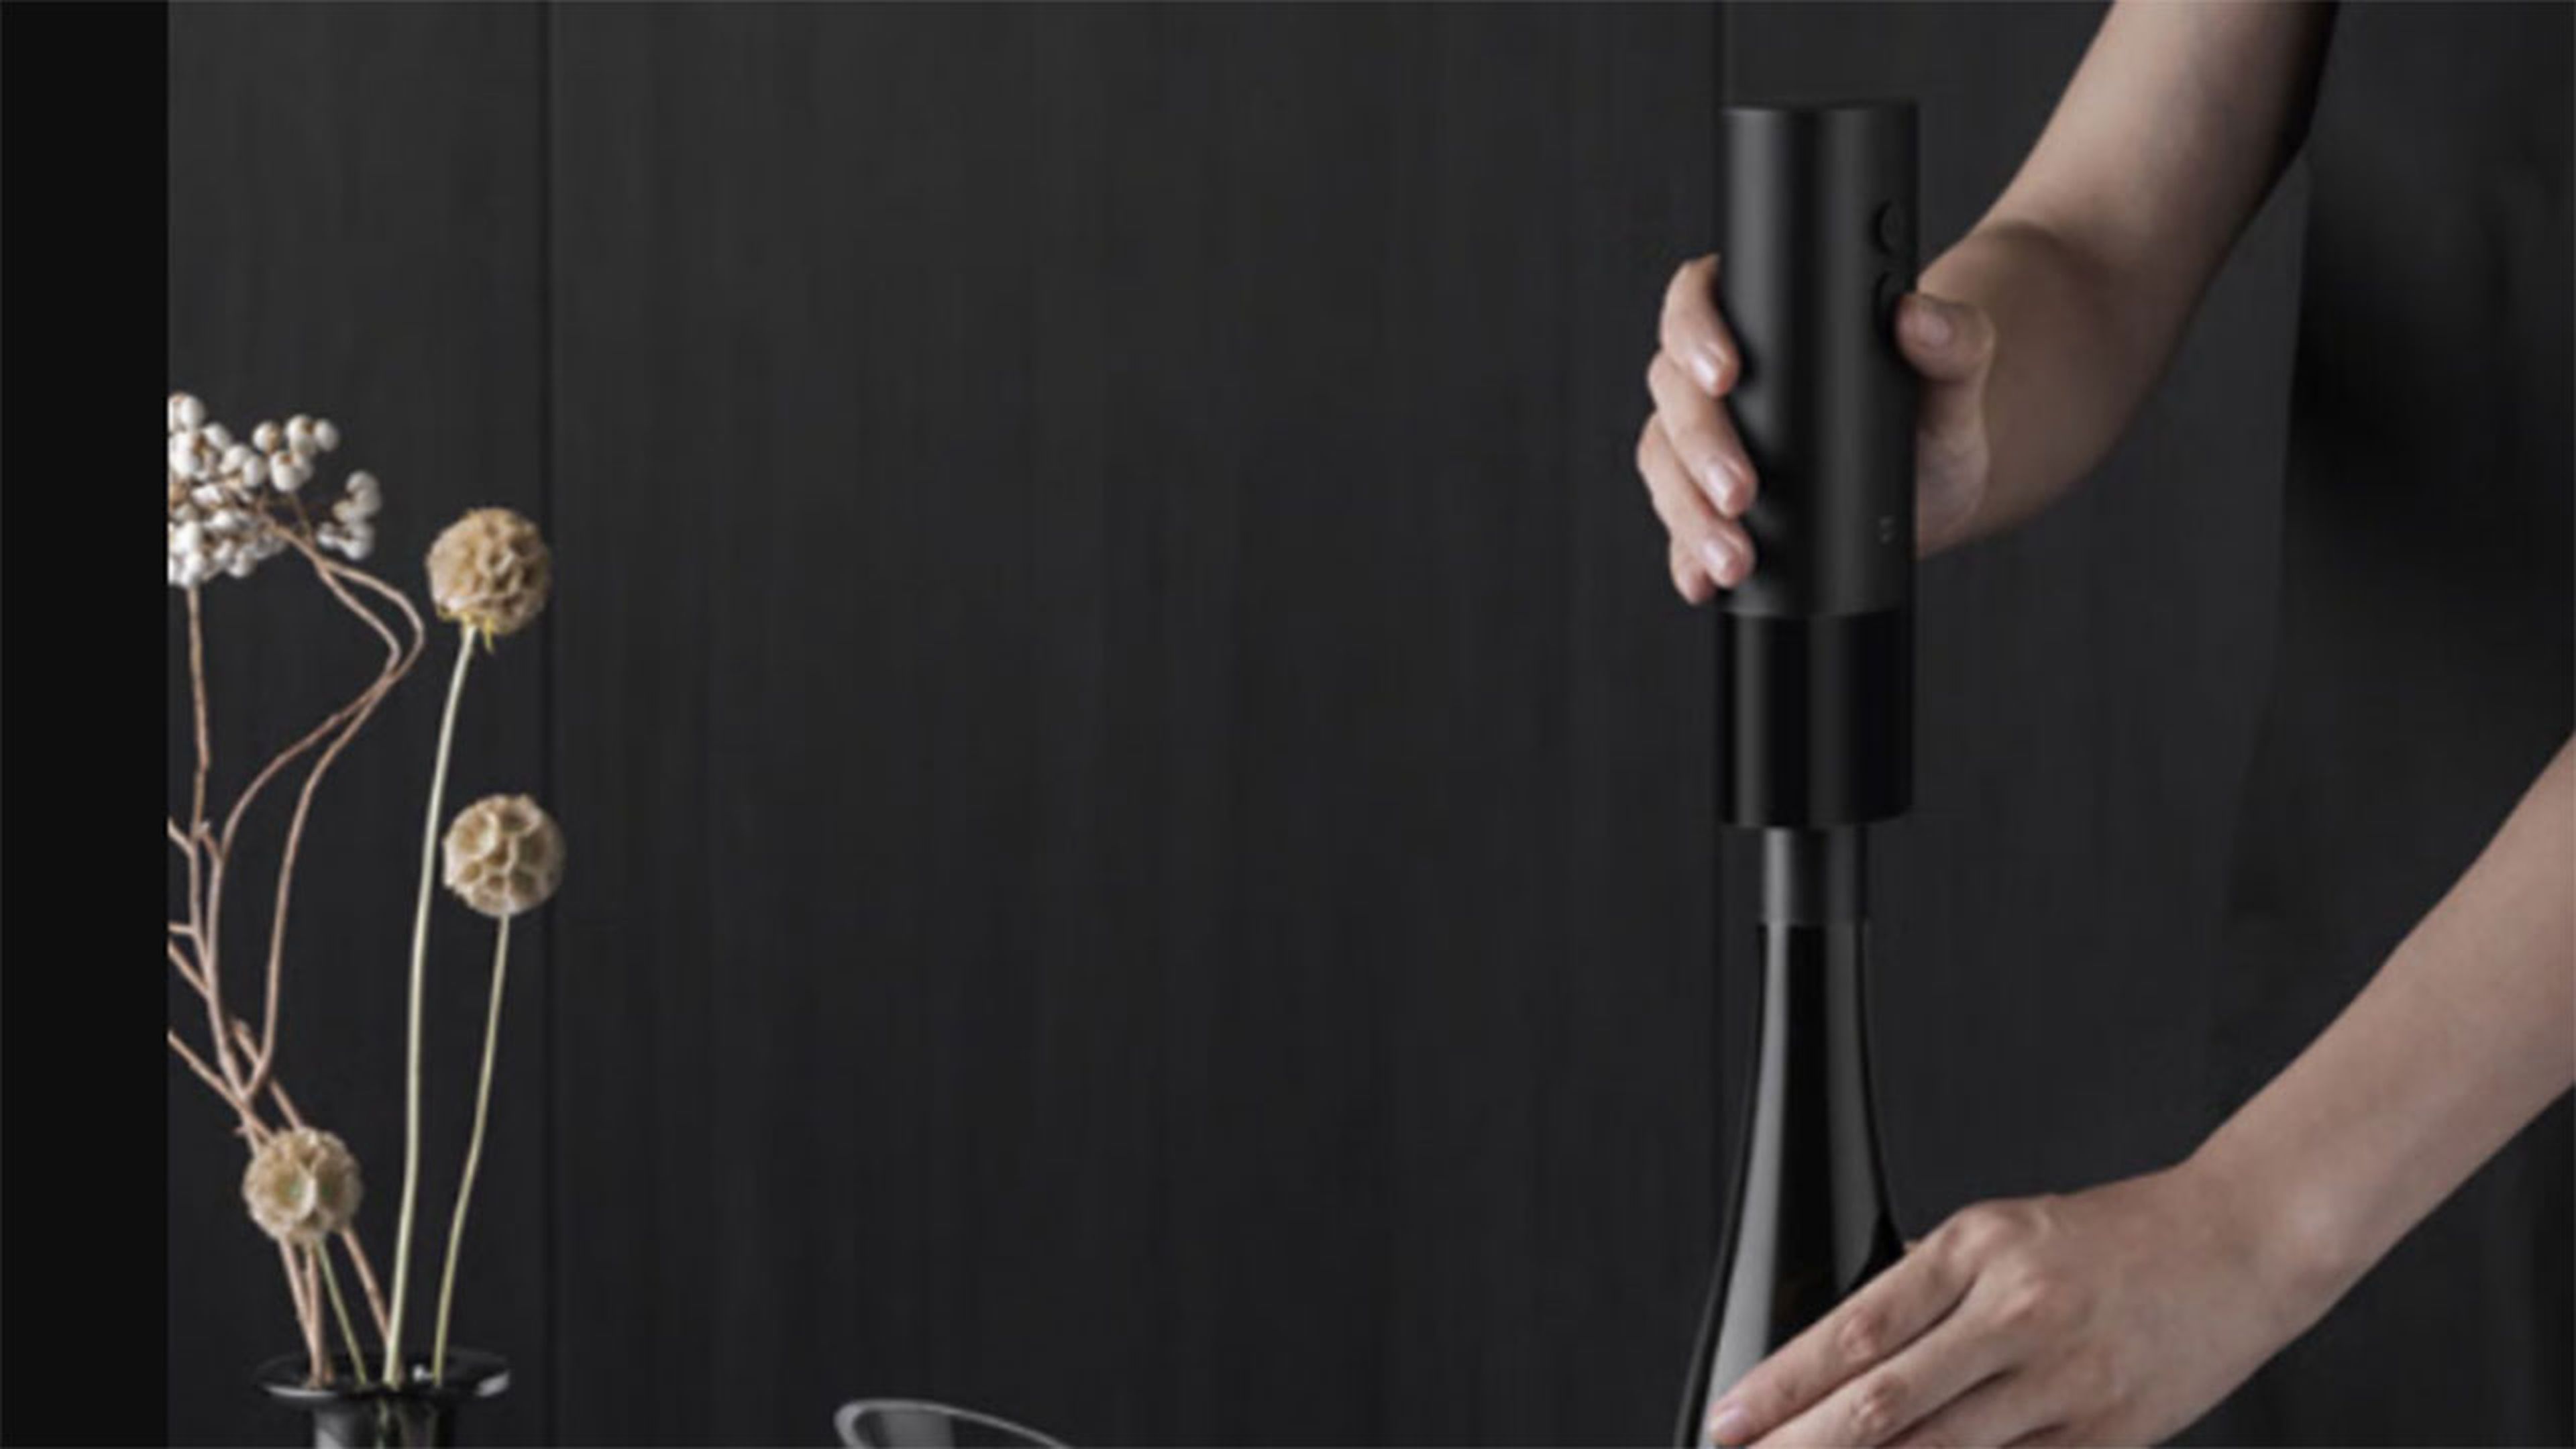 Xiaomi wants to revolutionize your kitchen with three new tools, including an electric wine opener